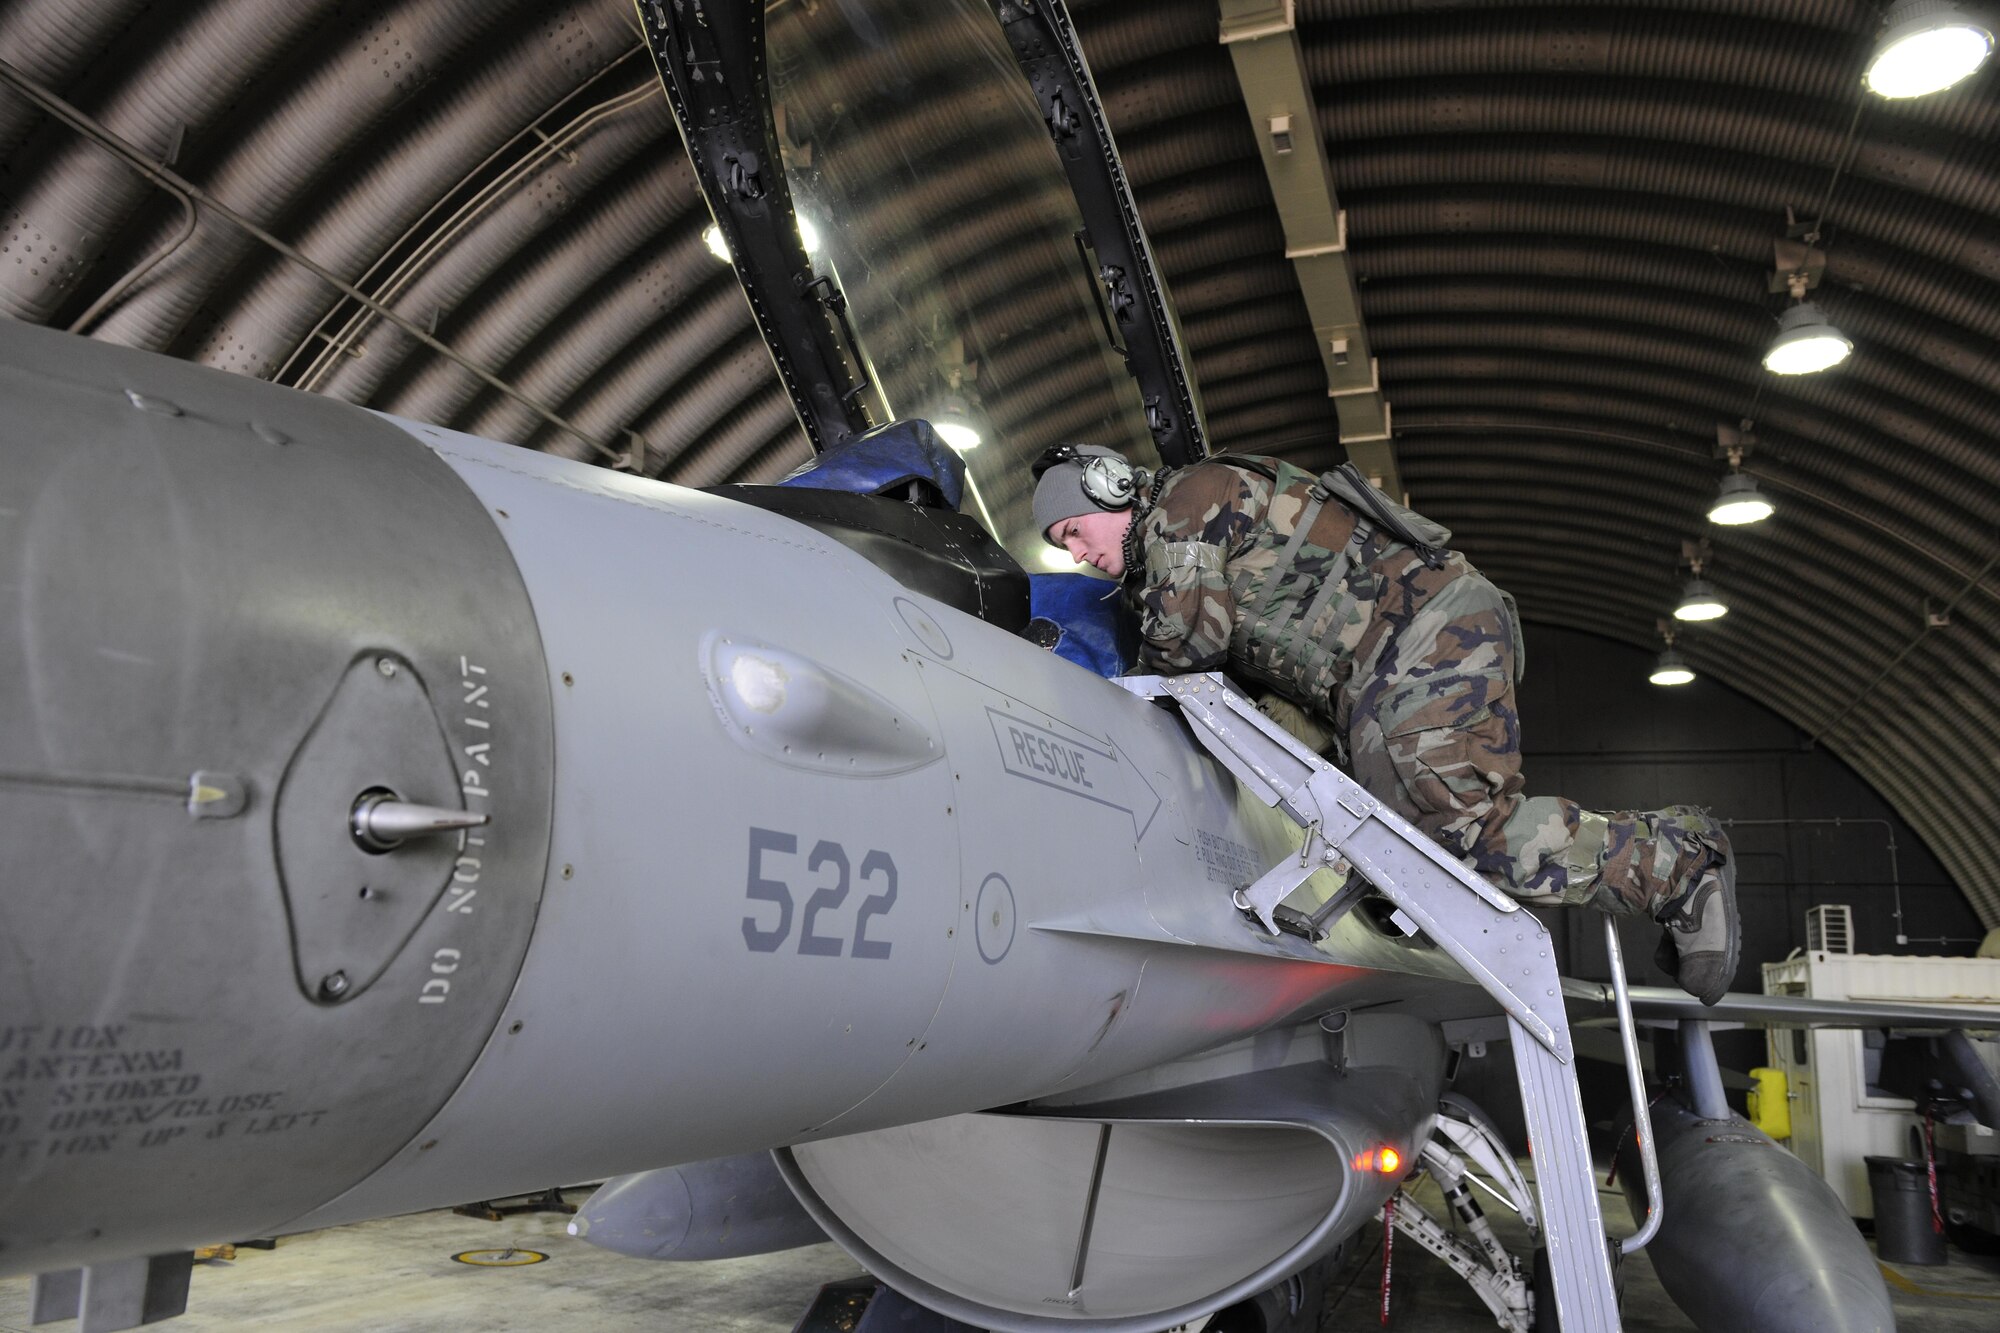 Senior Airman Kollin Bell, 35th Aircraft Maintenance Squadron crew chief, conducts a pre-flight lights inspection to ensure all critical lights are working on an F-16 Fighting Falcon during Beverly Pack 16-2 at Kunsan Air Base, Republic of Korea, Feb. 3, 2015. The 8th Maintenance Group’s over 1,000 Airmen have worked around-the-clock amid temperatures in the teens to ensure all the wing’s  F-16s are ready to fly safely. (U.S. Air Force photo by Senior Airman Dustin King/Released)